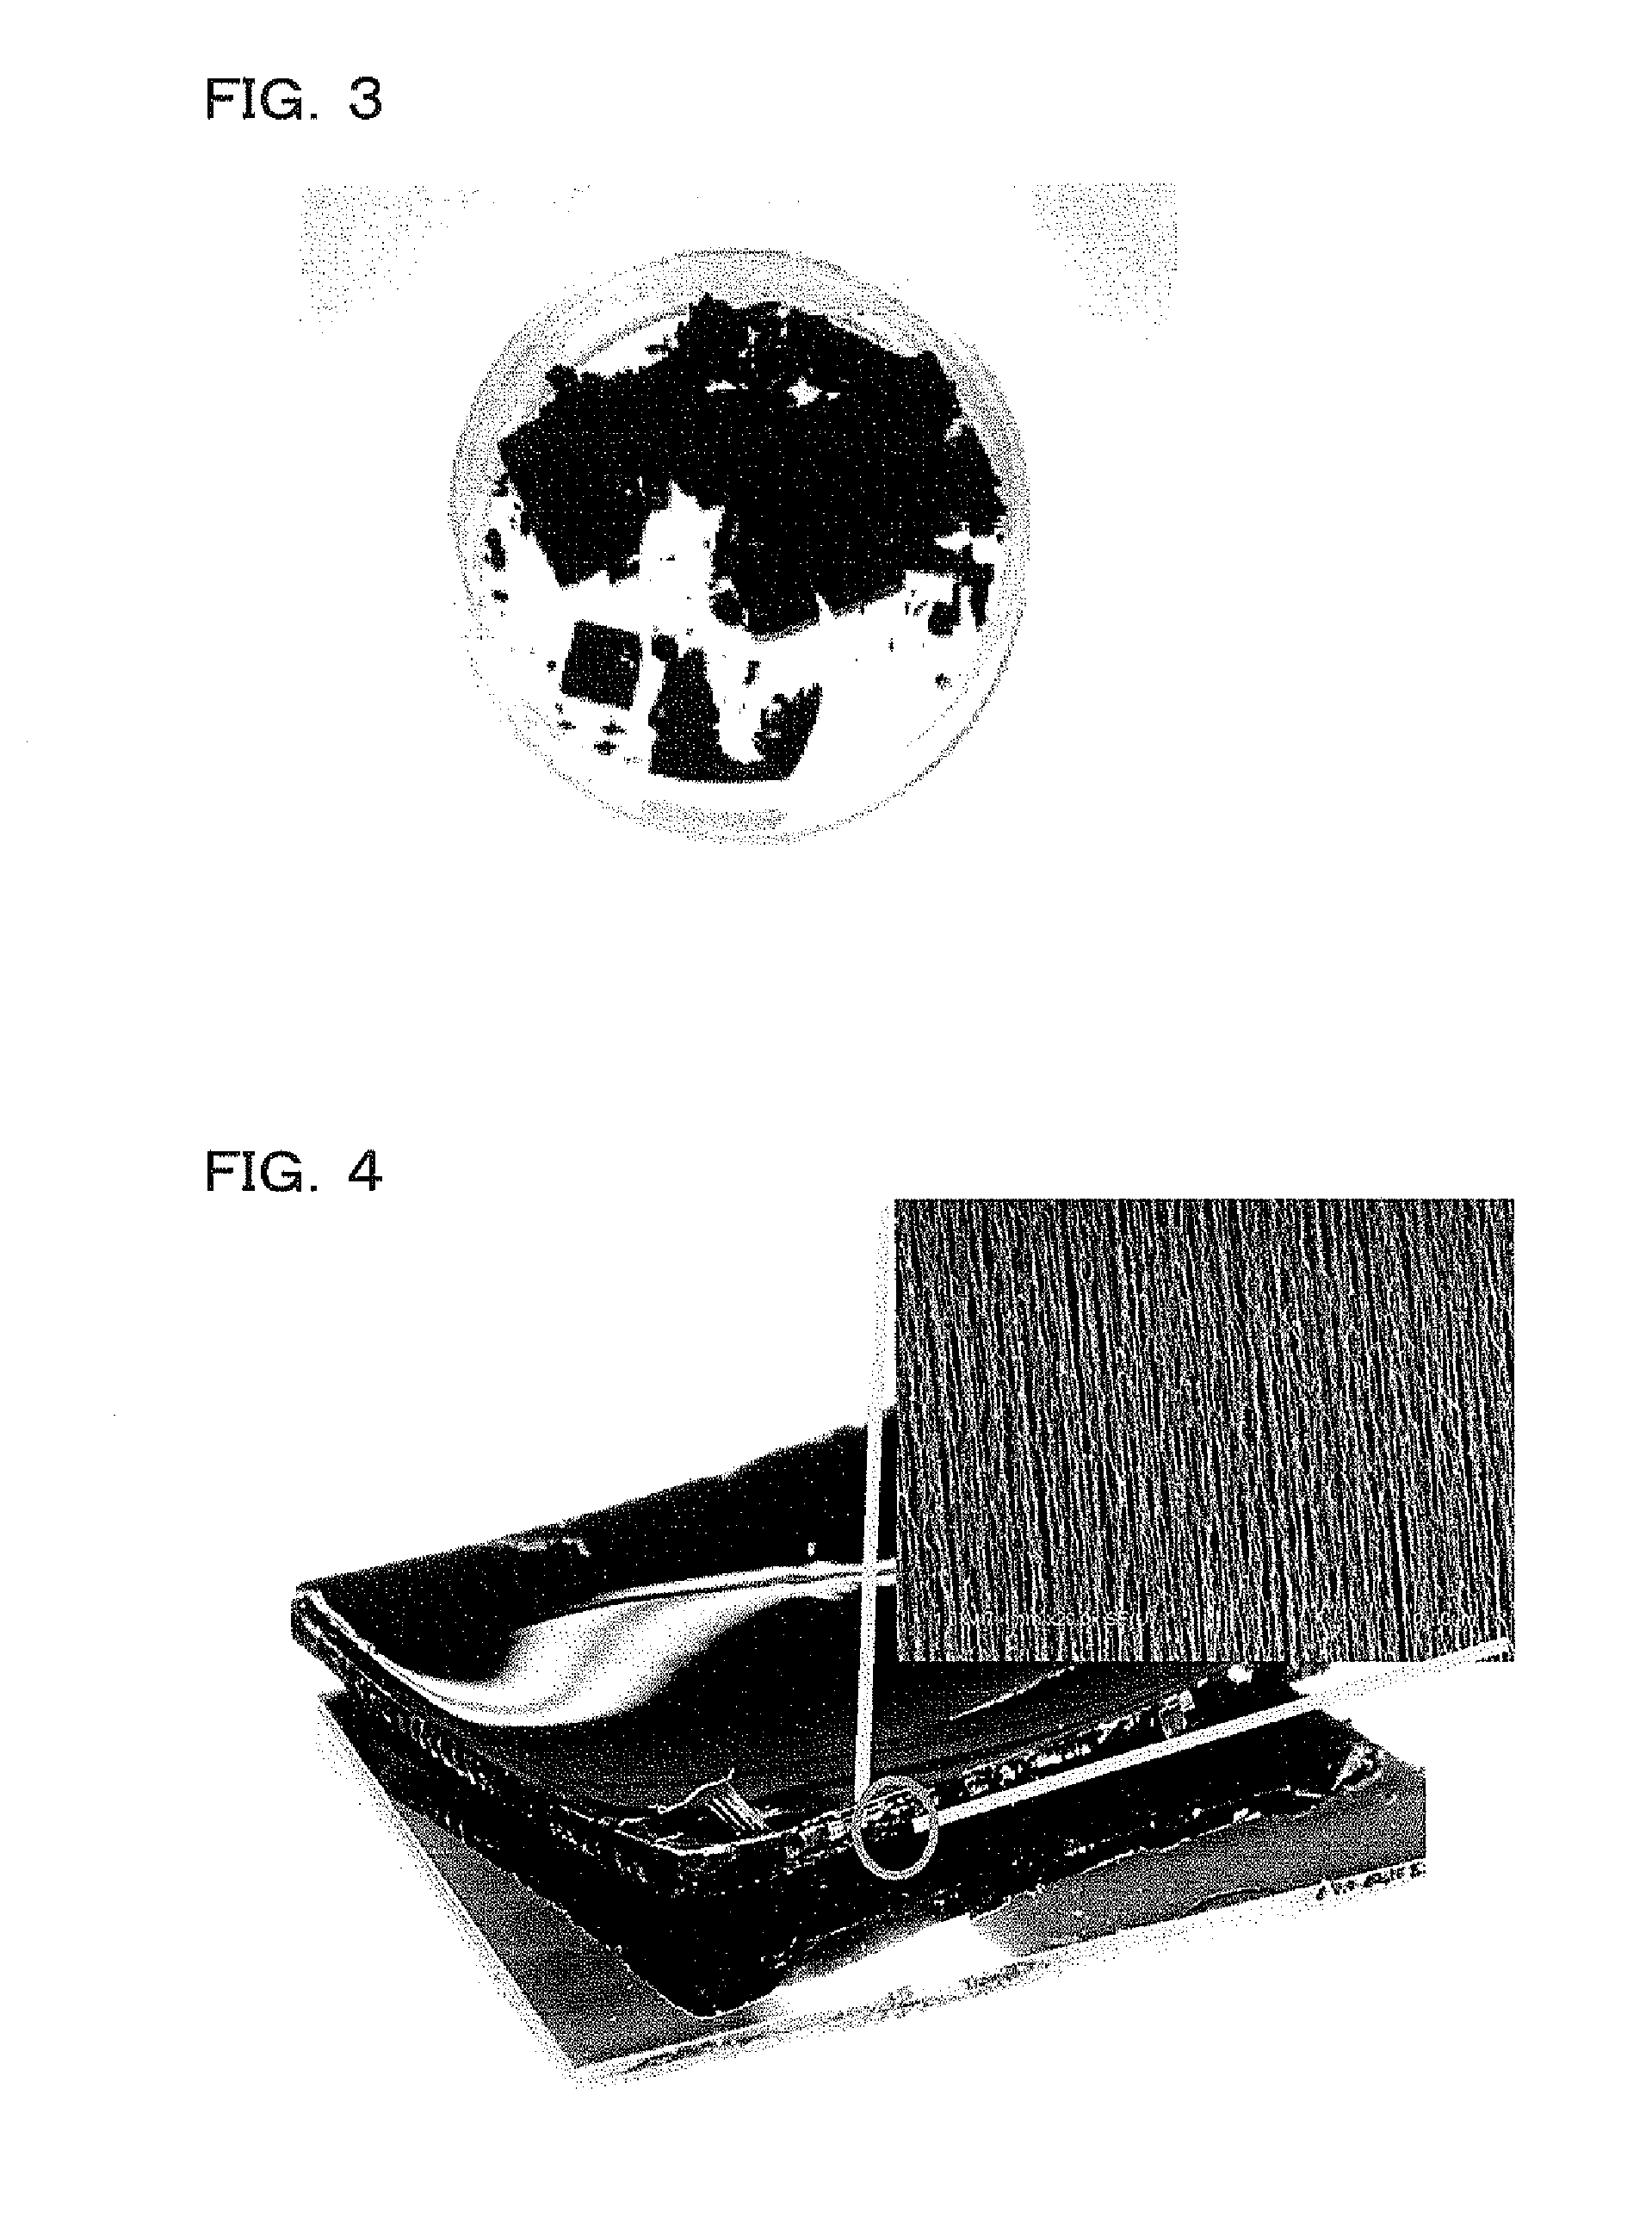 Aligned single-walled carbon nanotube aggregate, bulk aligned single-walled carbon nanotube aggregate, powdered aligned single-walled carbon nanotube aggregate, and production method thereof